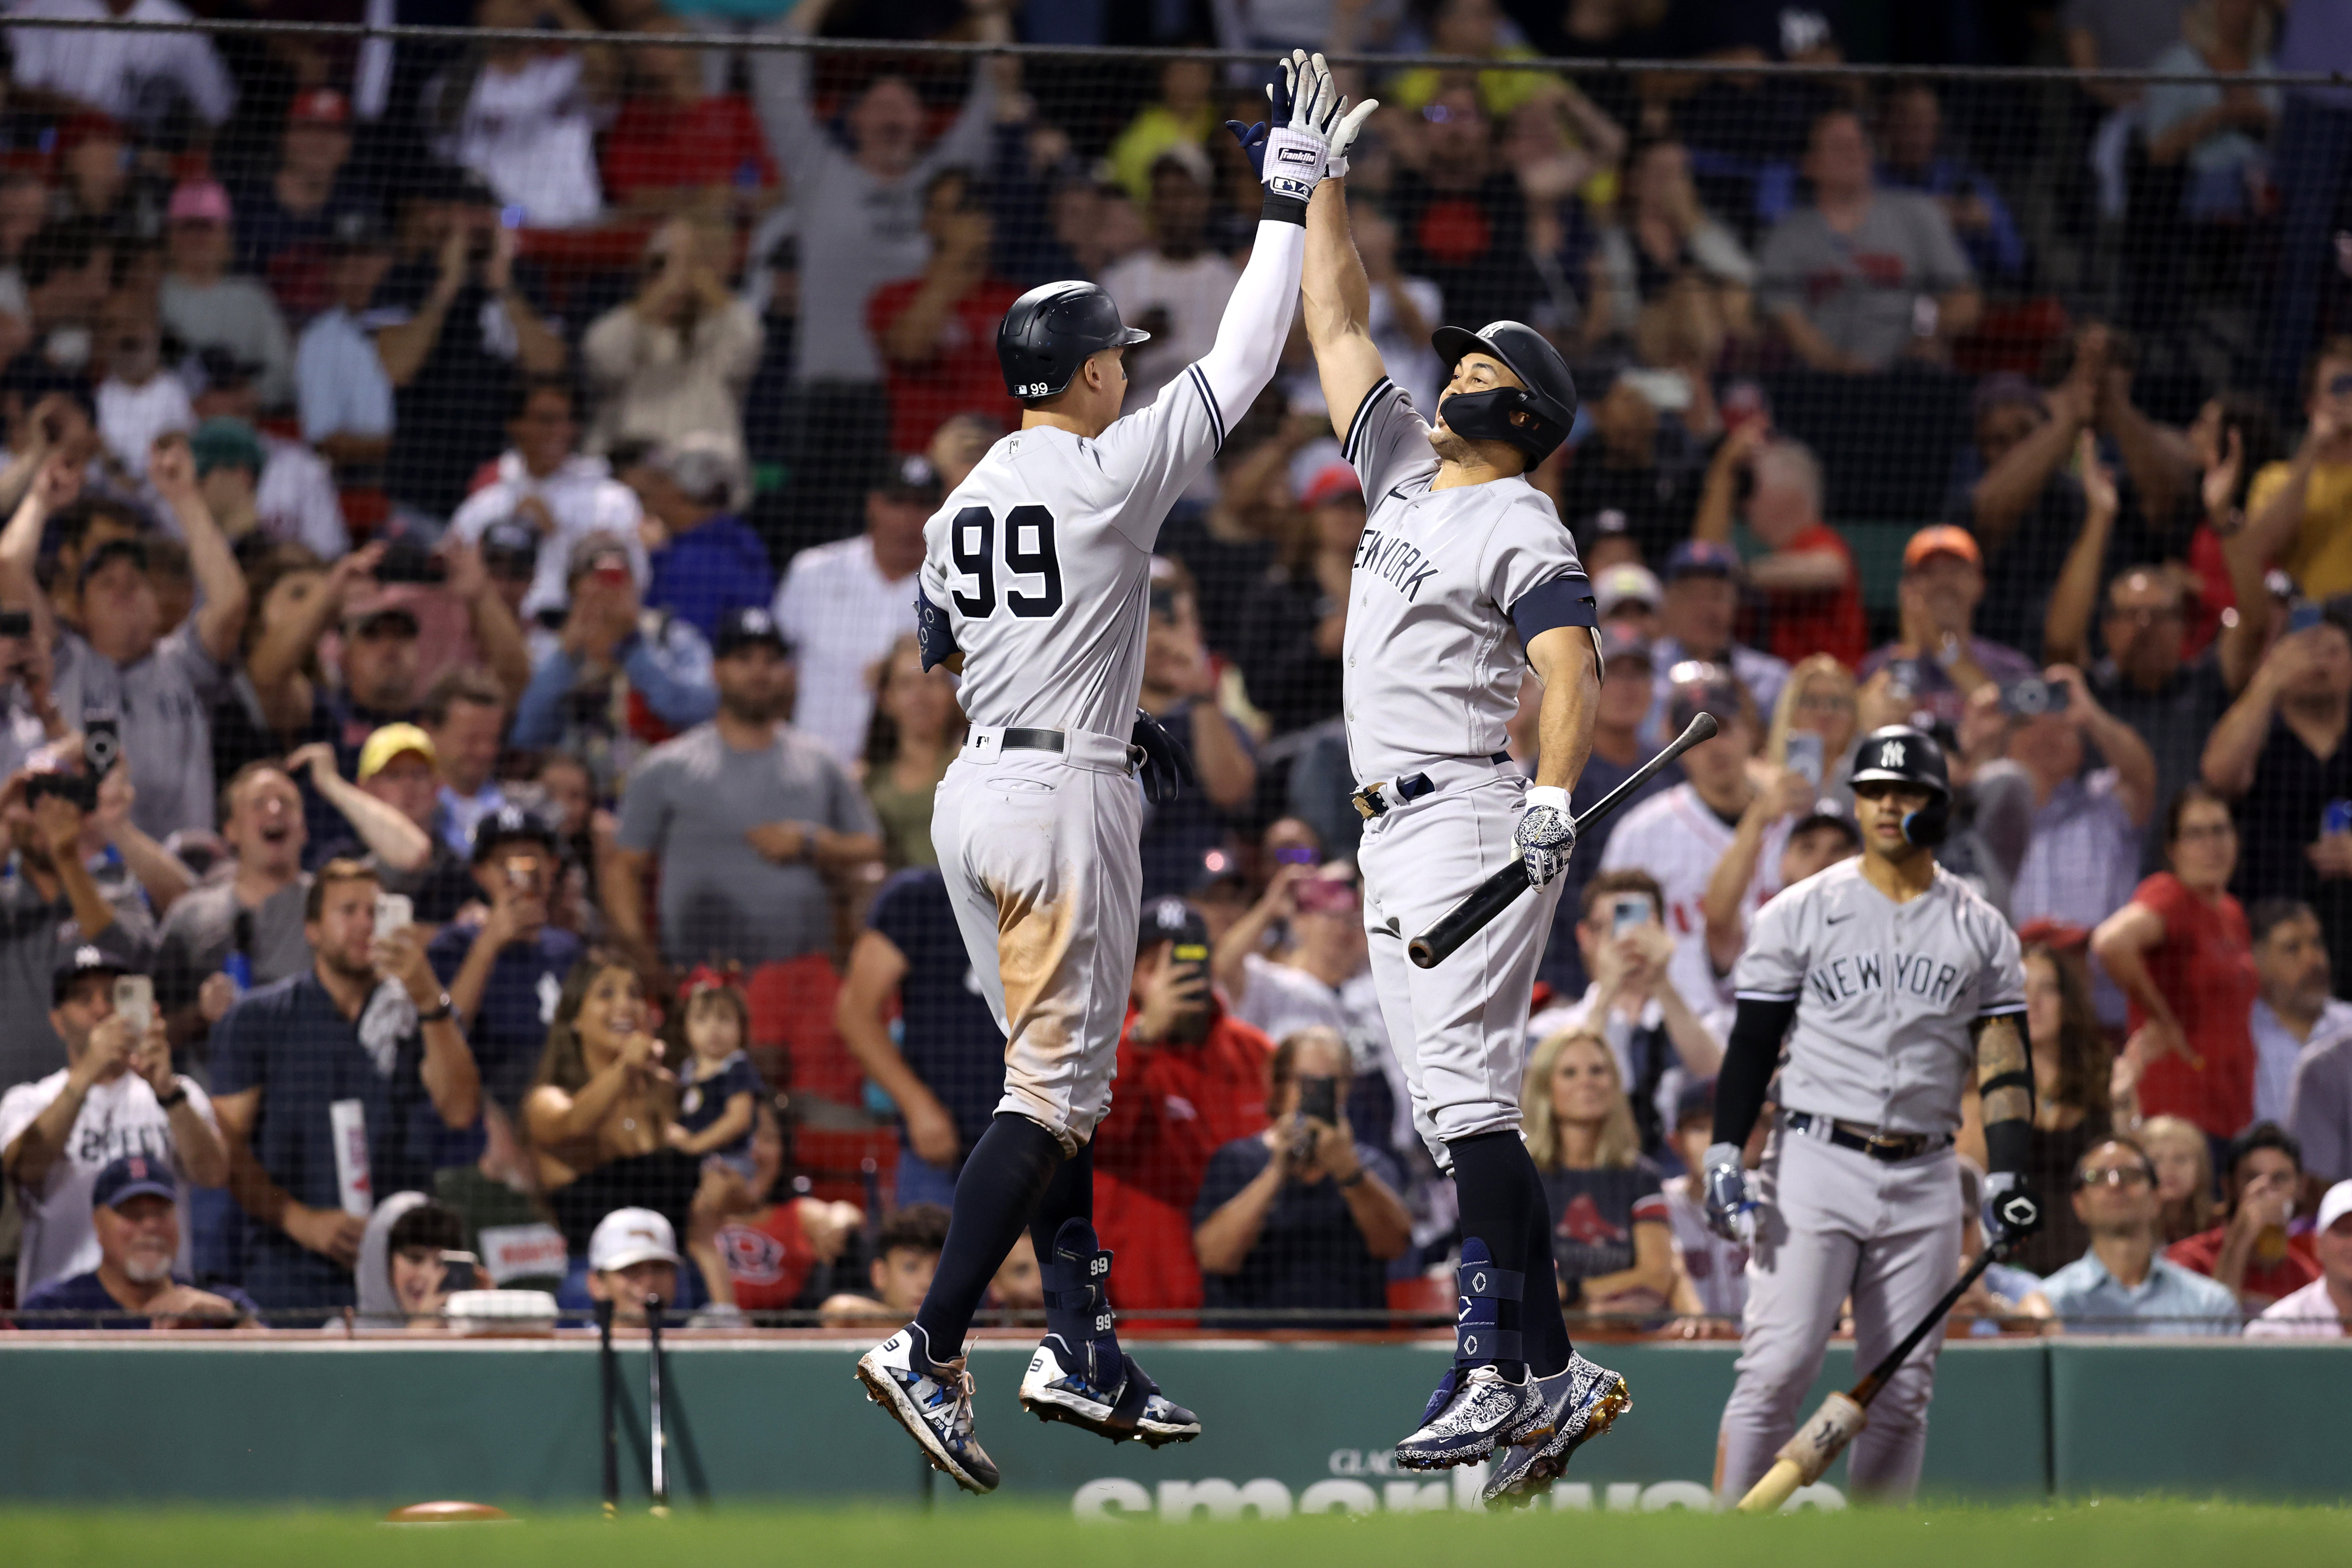 Judge hits 3 home runs, becomes first Yankees player to do it twice